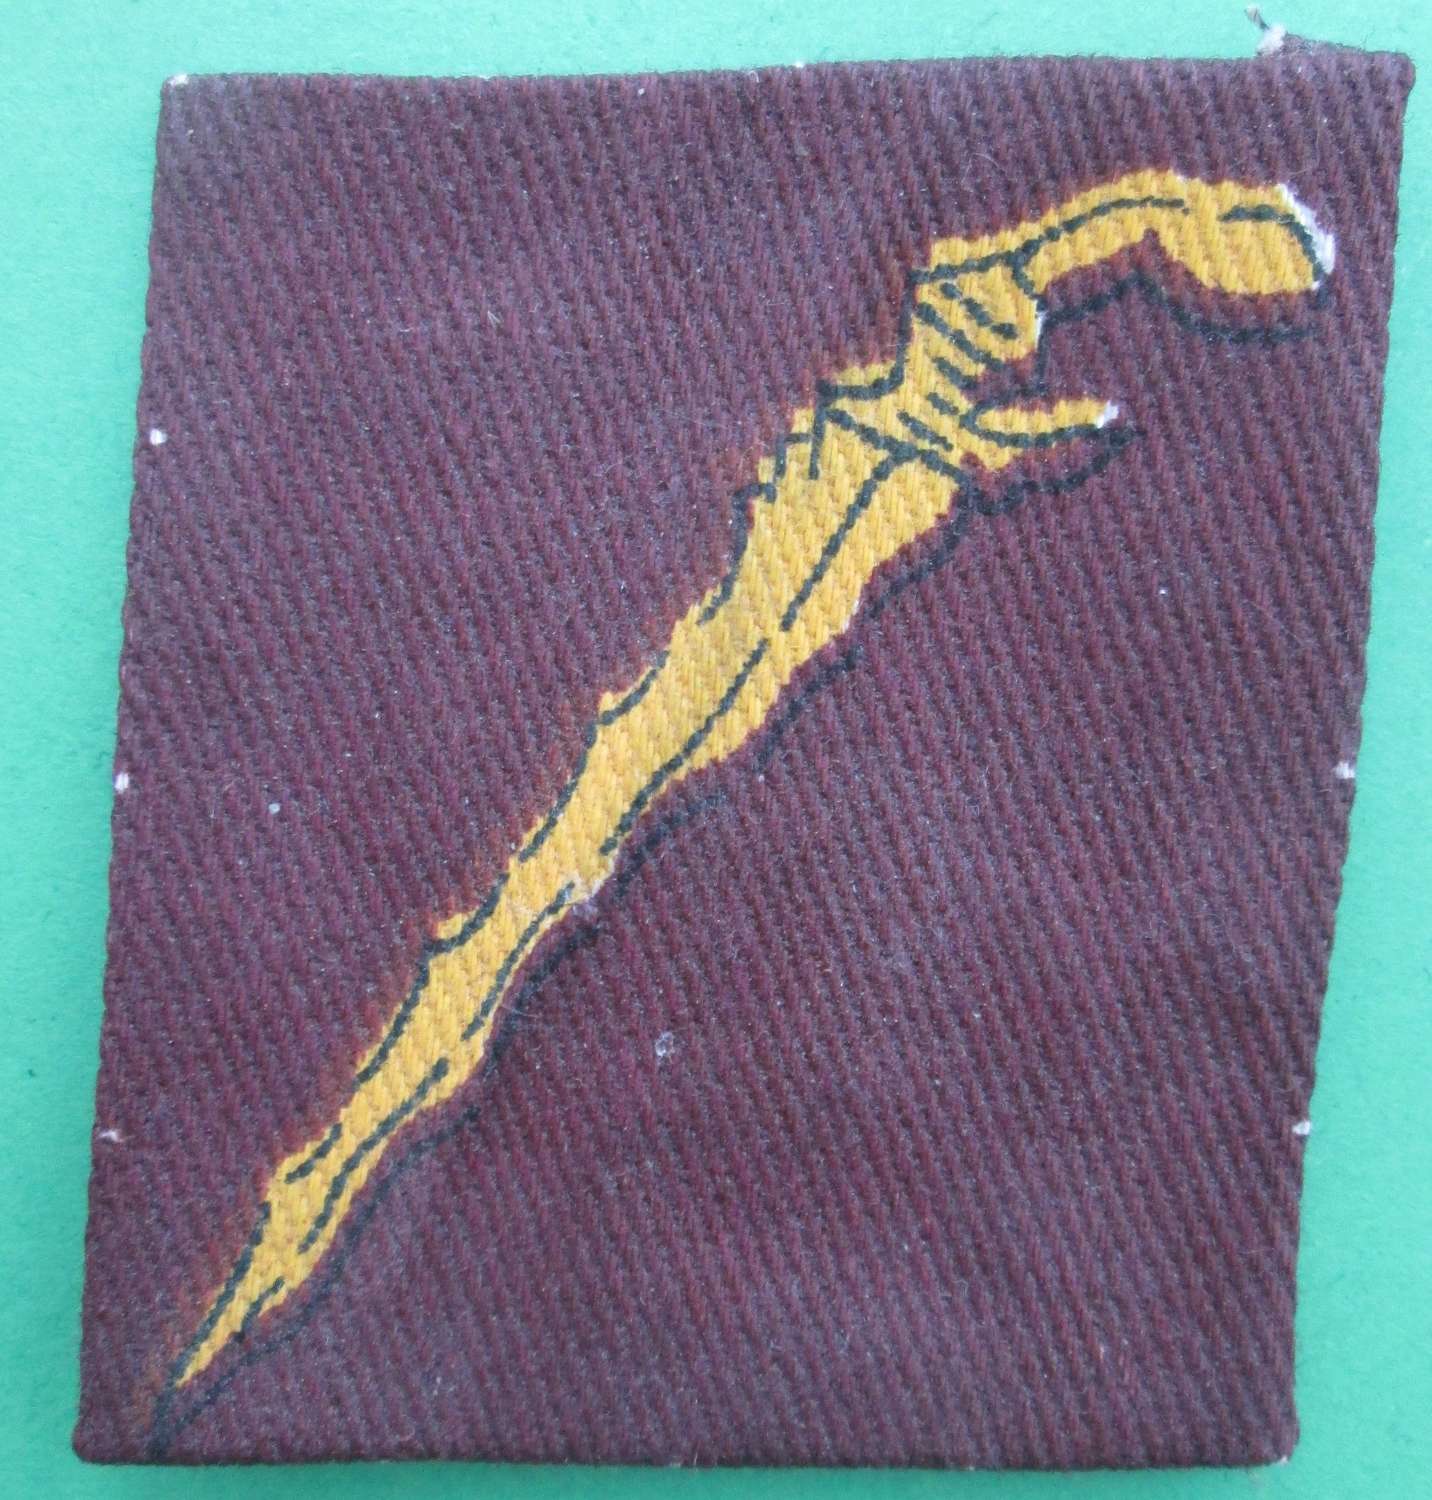 AN HQ OVERSEAS COMMONWEALTH LAND FORCES FORMATION SIGN